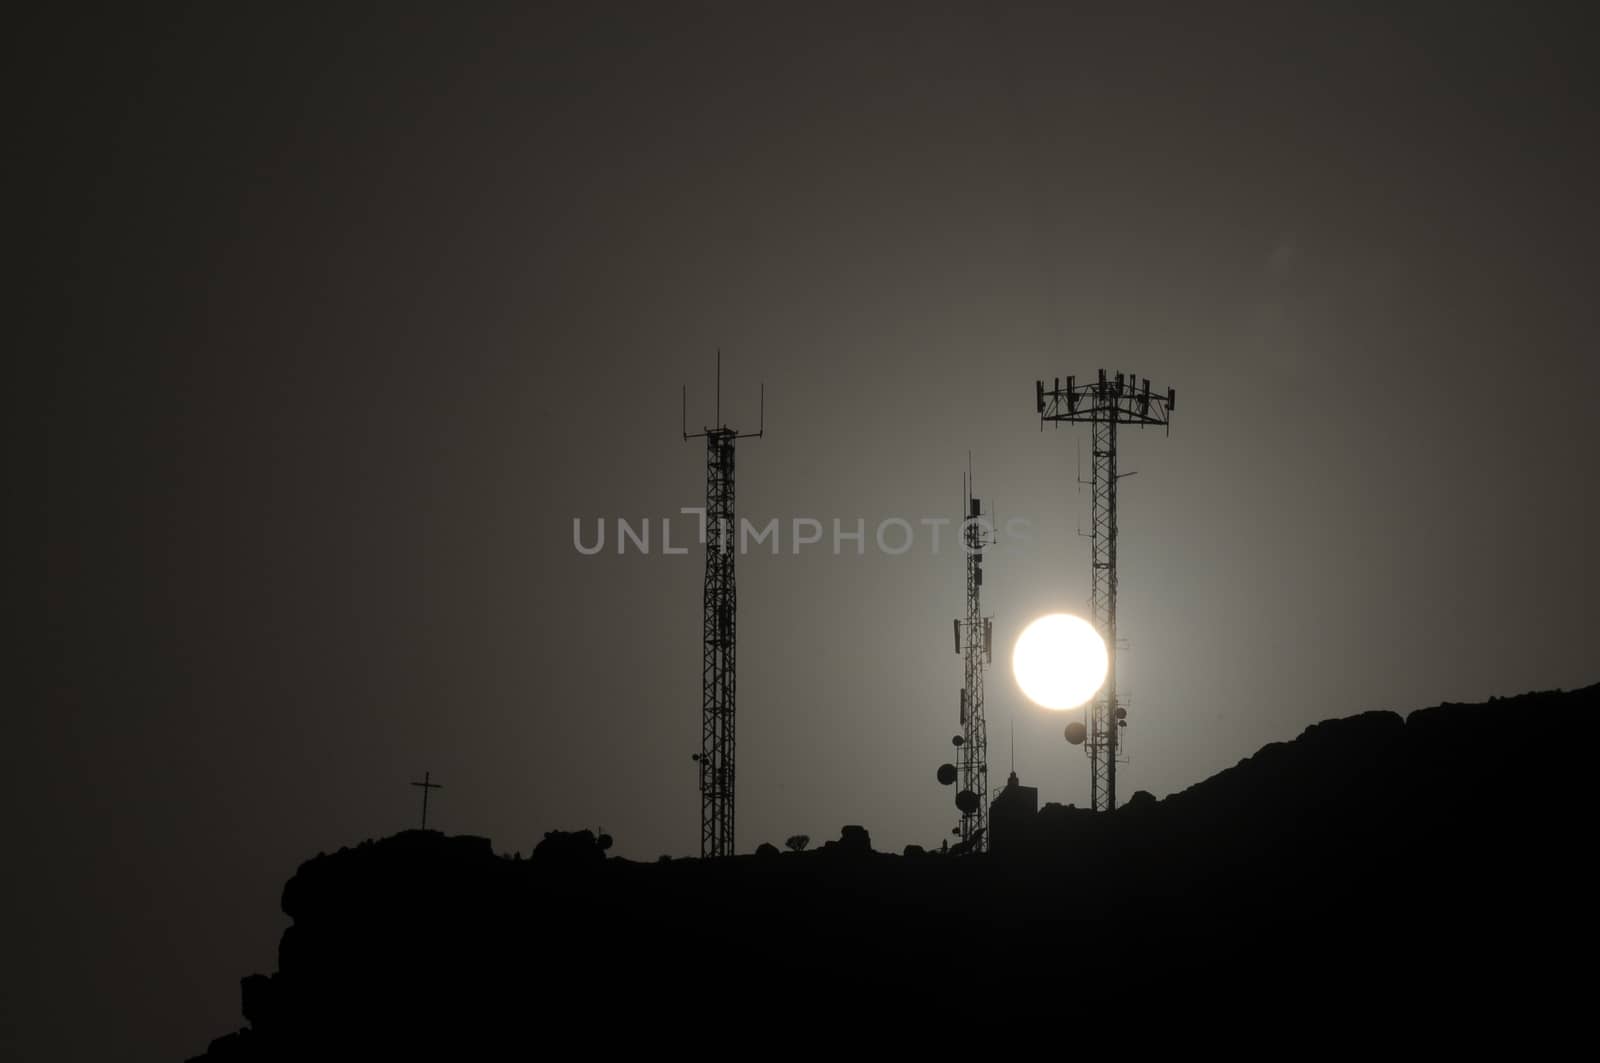 Some Silhouetted Antennas by underworld